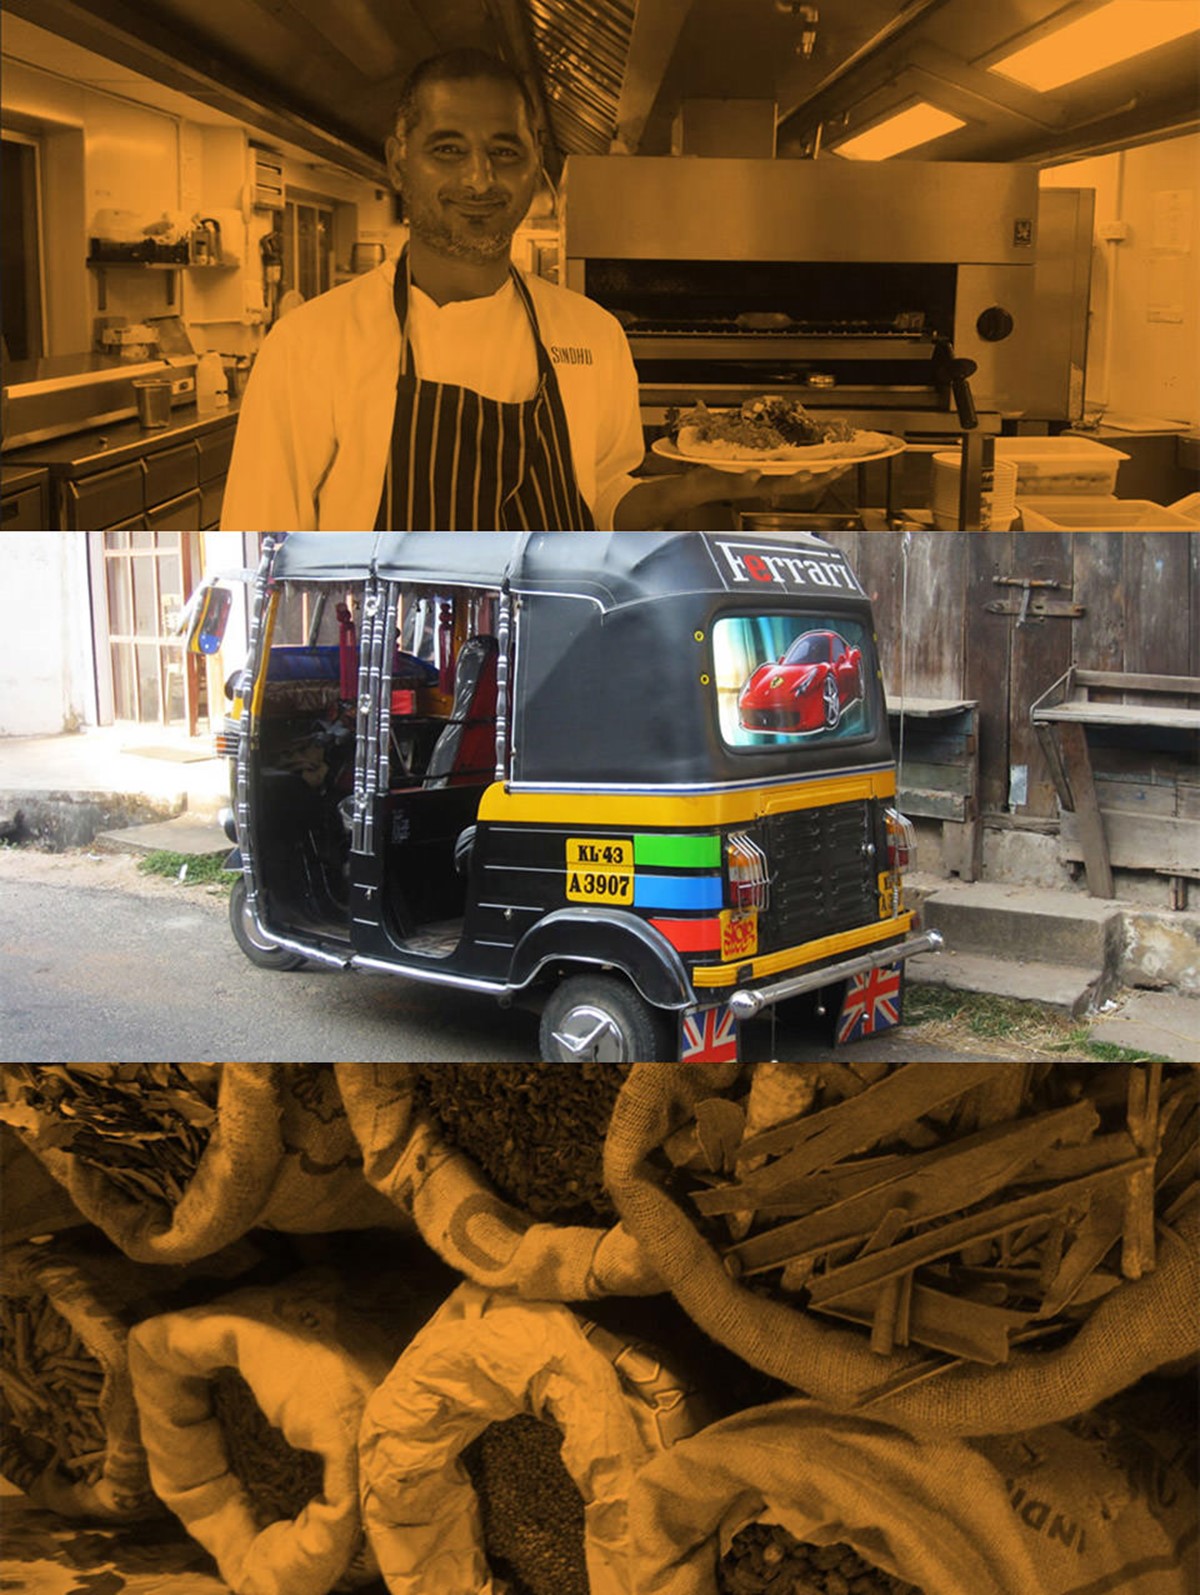 Hullabaloo. Indian Street Food. Photo montage. Brand identity design by Superfried.